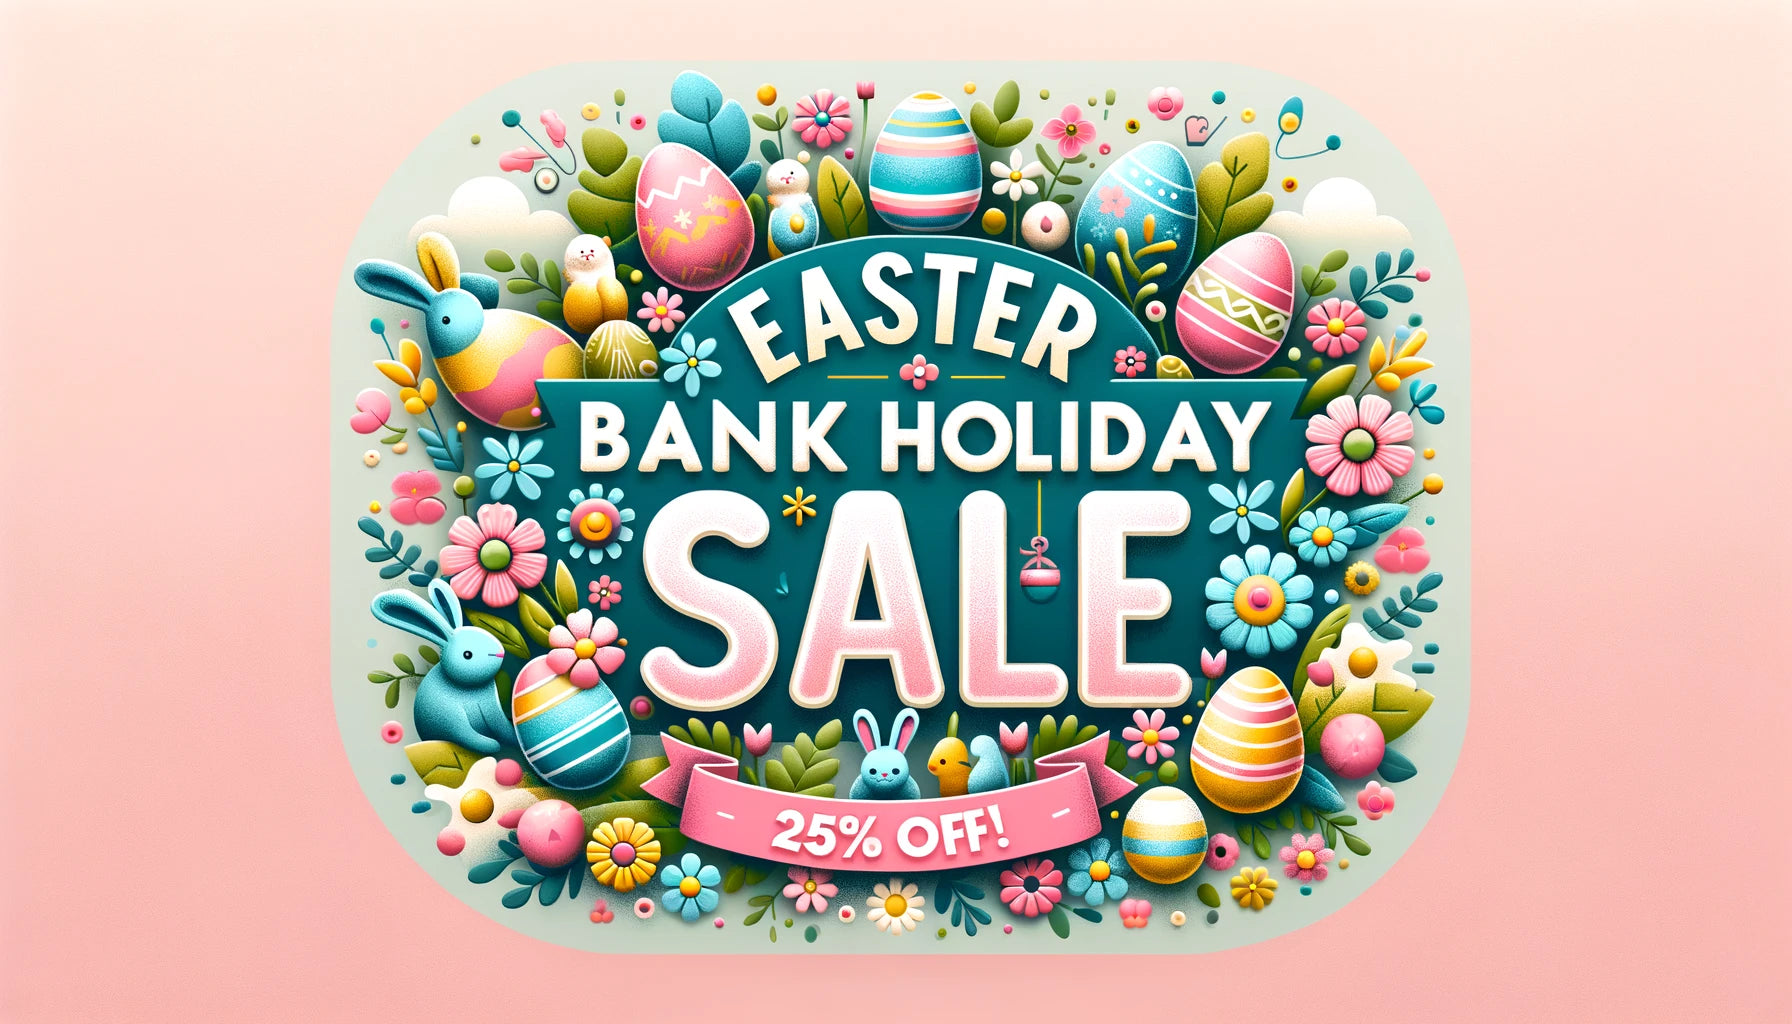 A festive and eye-catching blog post banner for an Easter Bank Holiday sale, featuring a theme of Easter and spring.